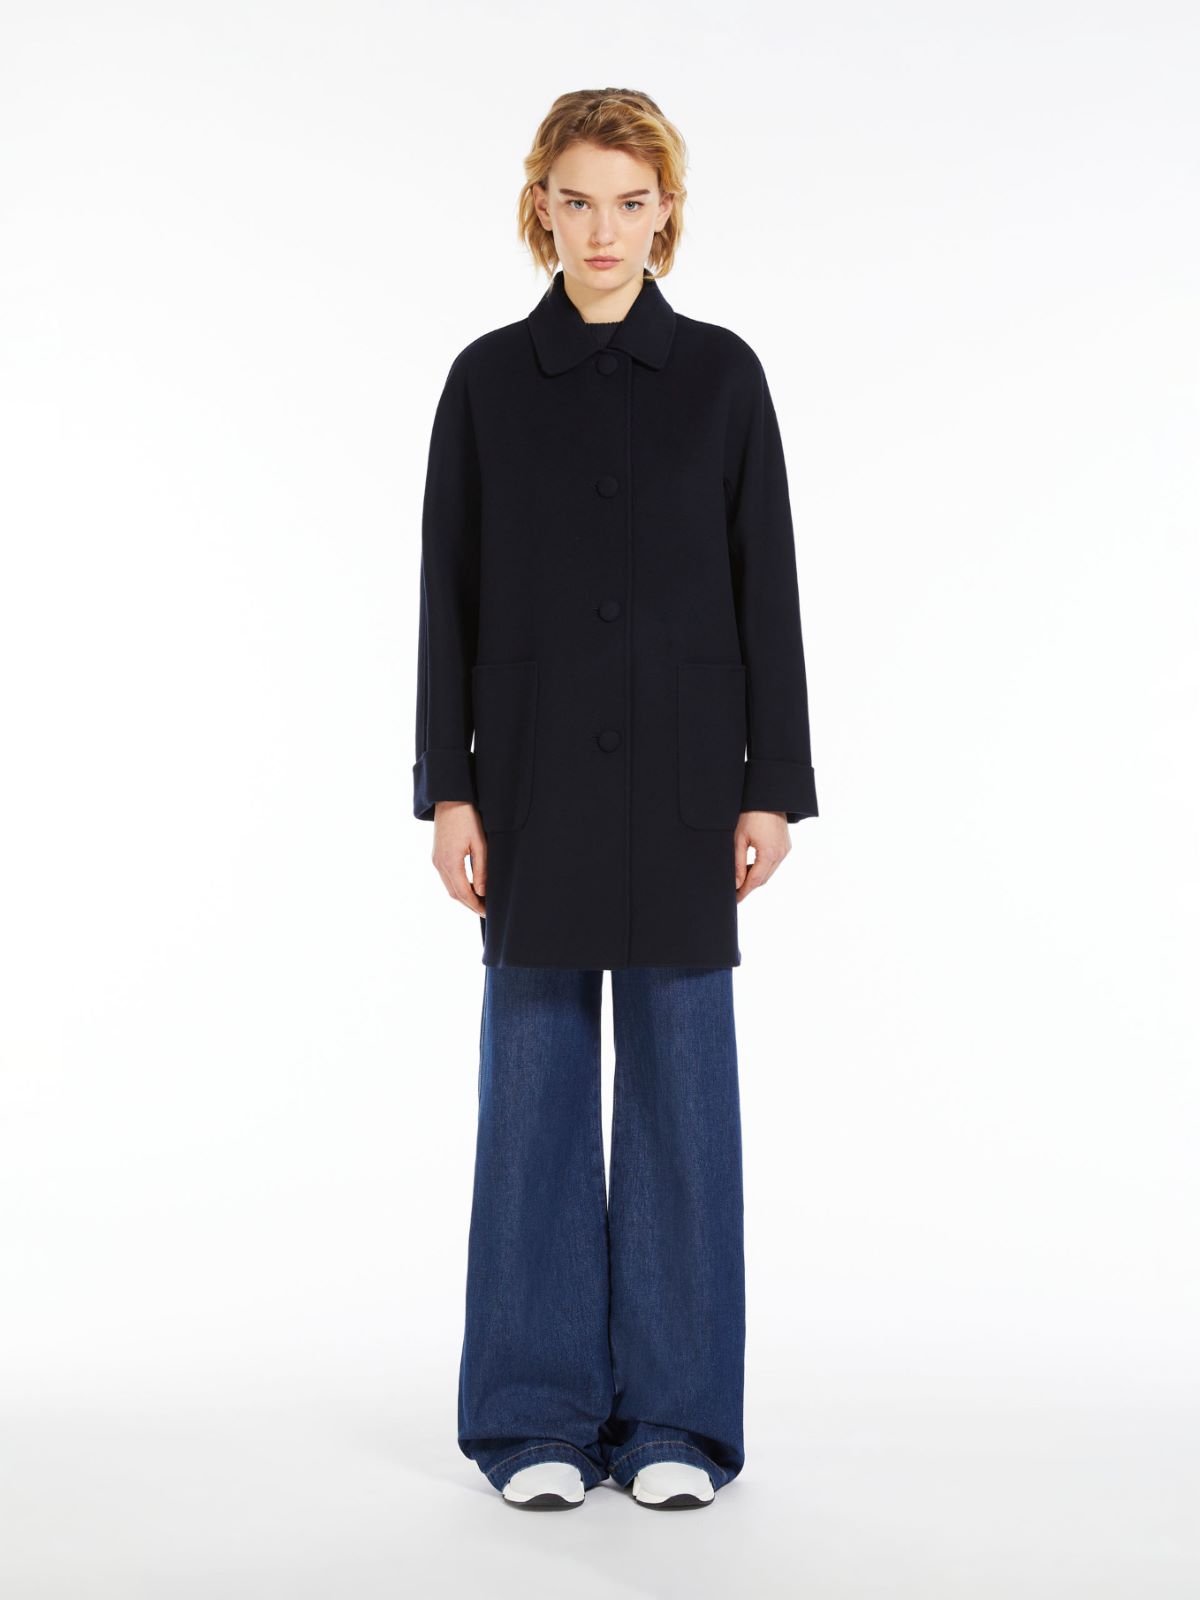 Double-faced wool coat, navy